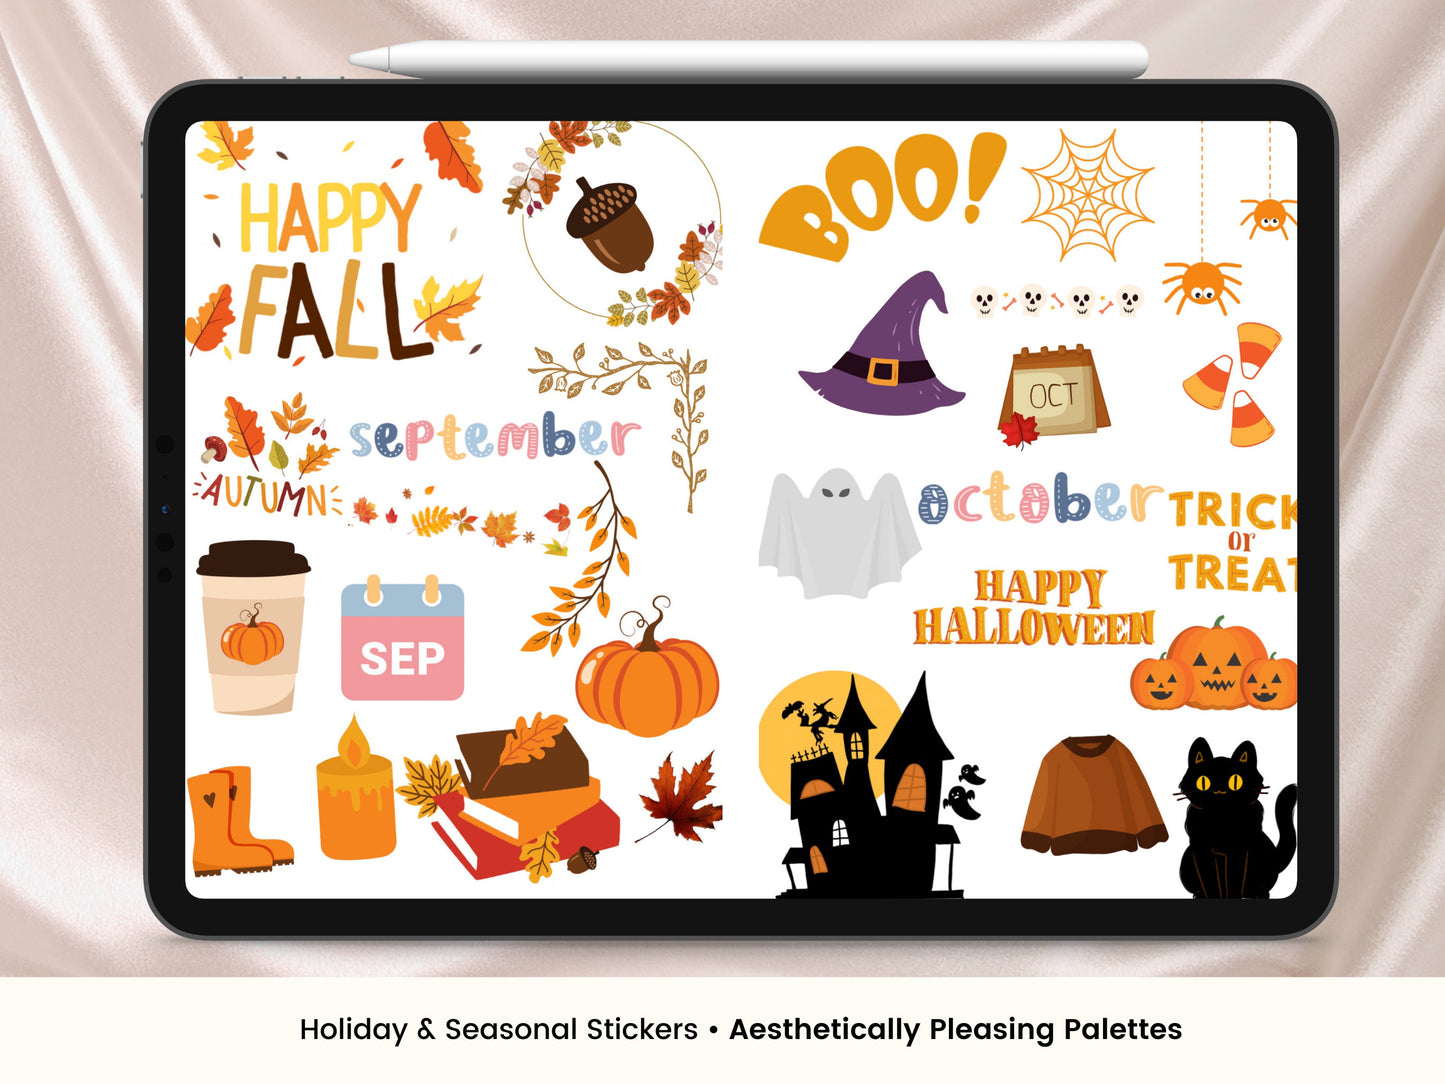 Yearly holiday Digital Stickers